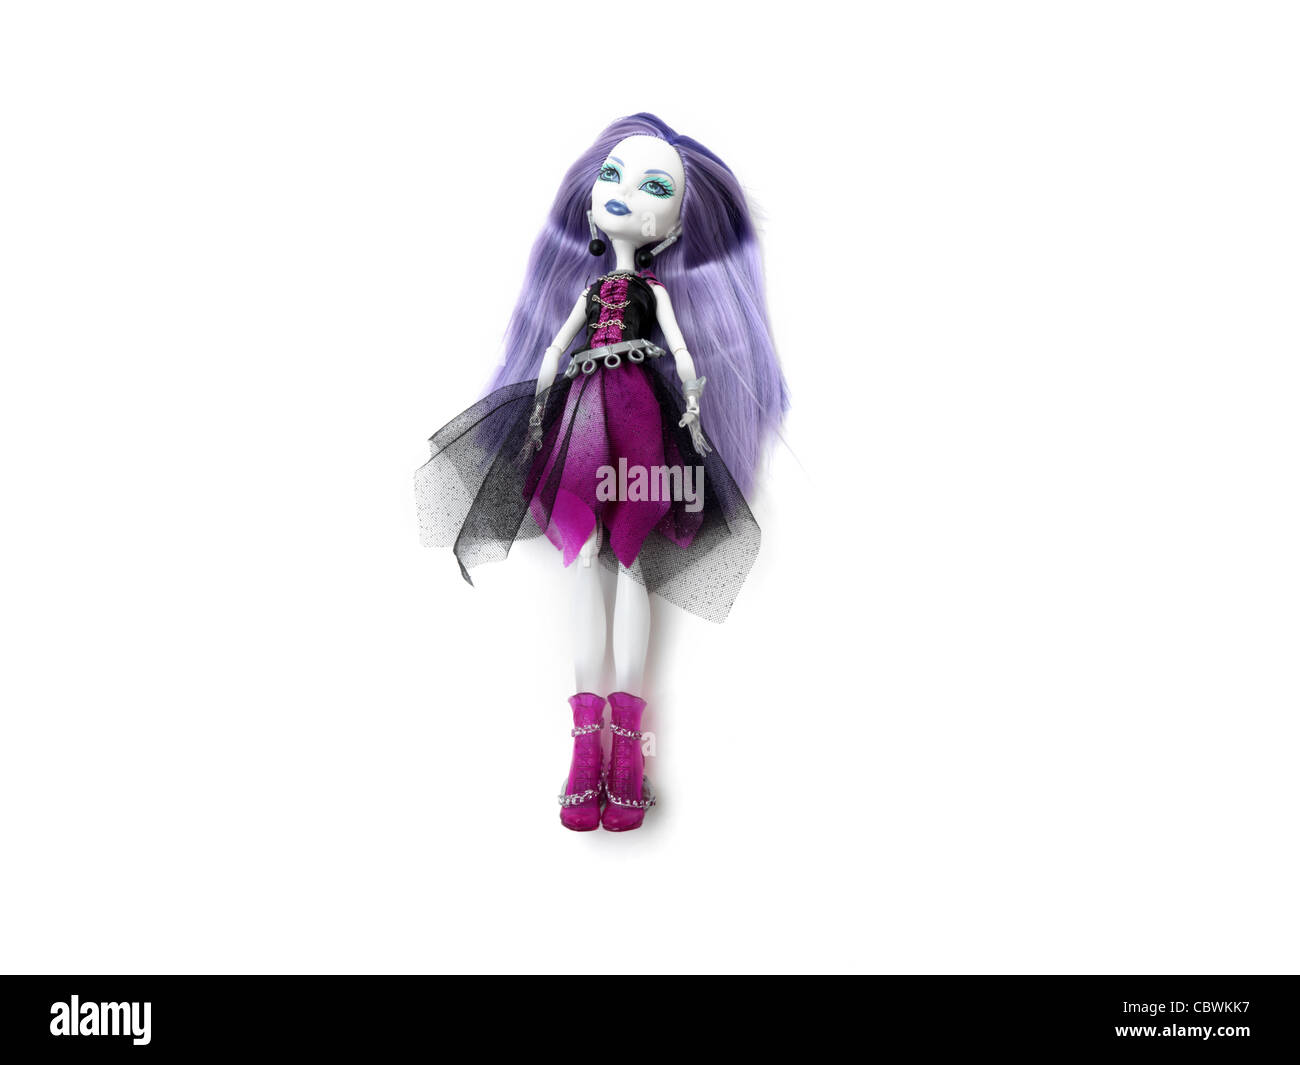 Monster High Doll Spectra Vondergeist Daughter Of A Ghost With Purple Hair  And White Skin And Transparent Hands Stock Photo - Alamy